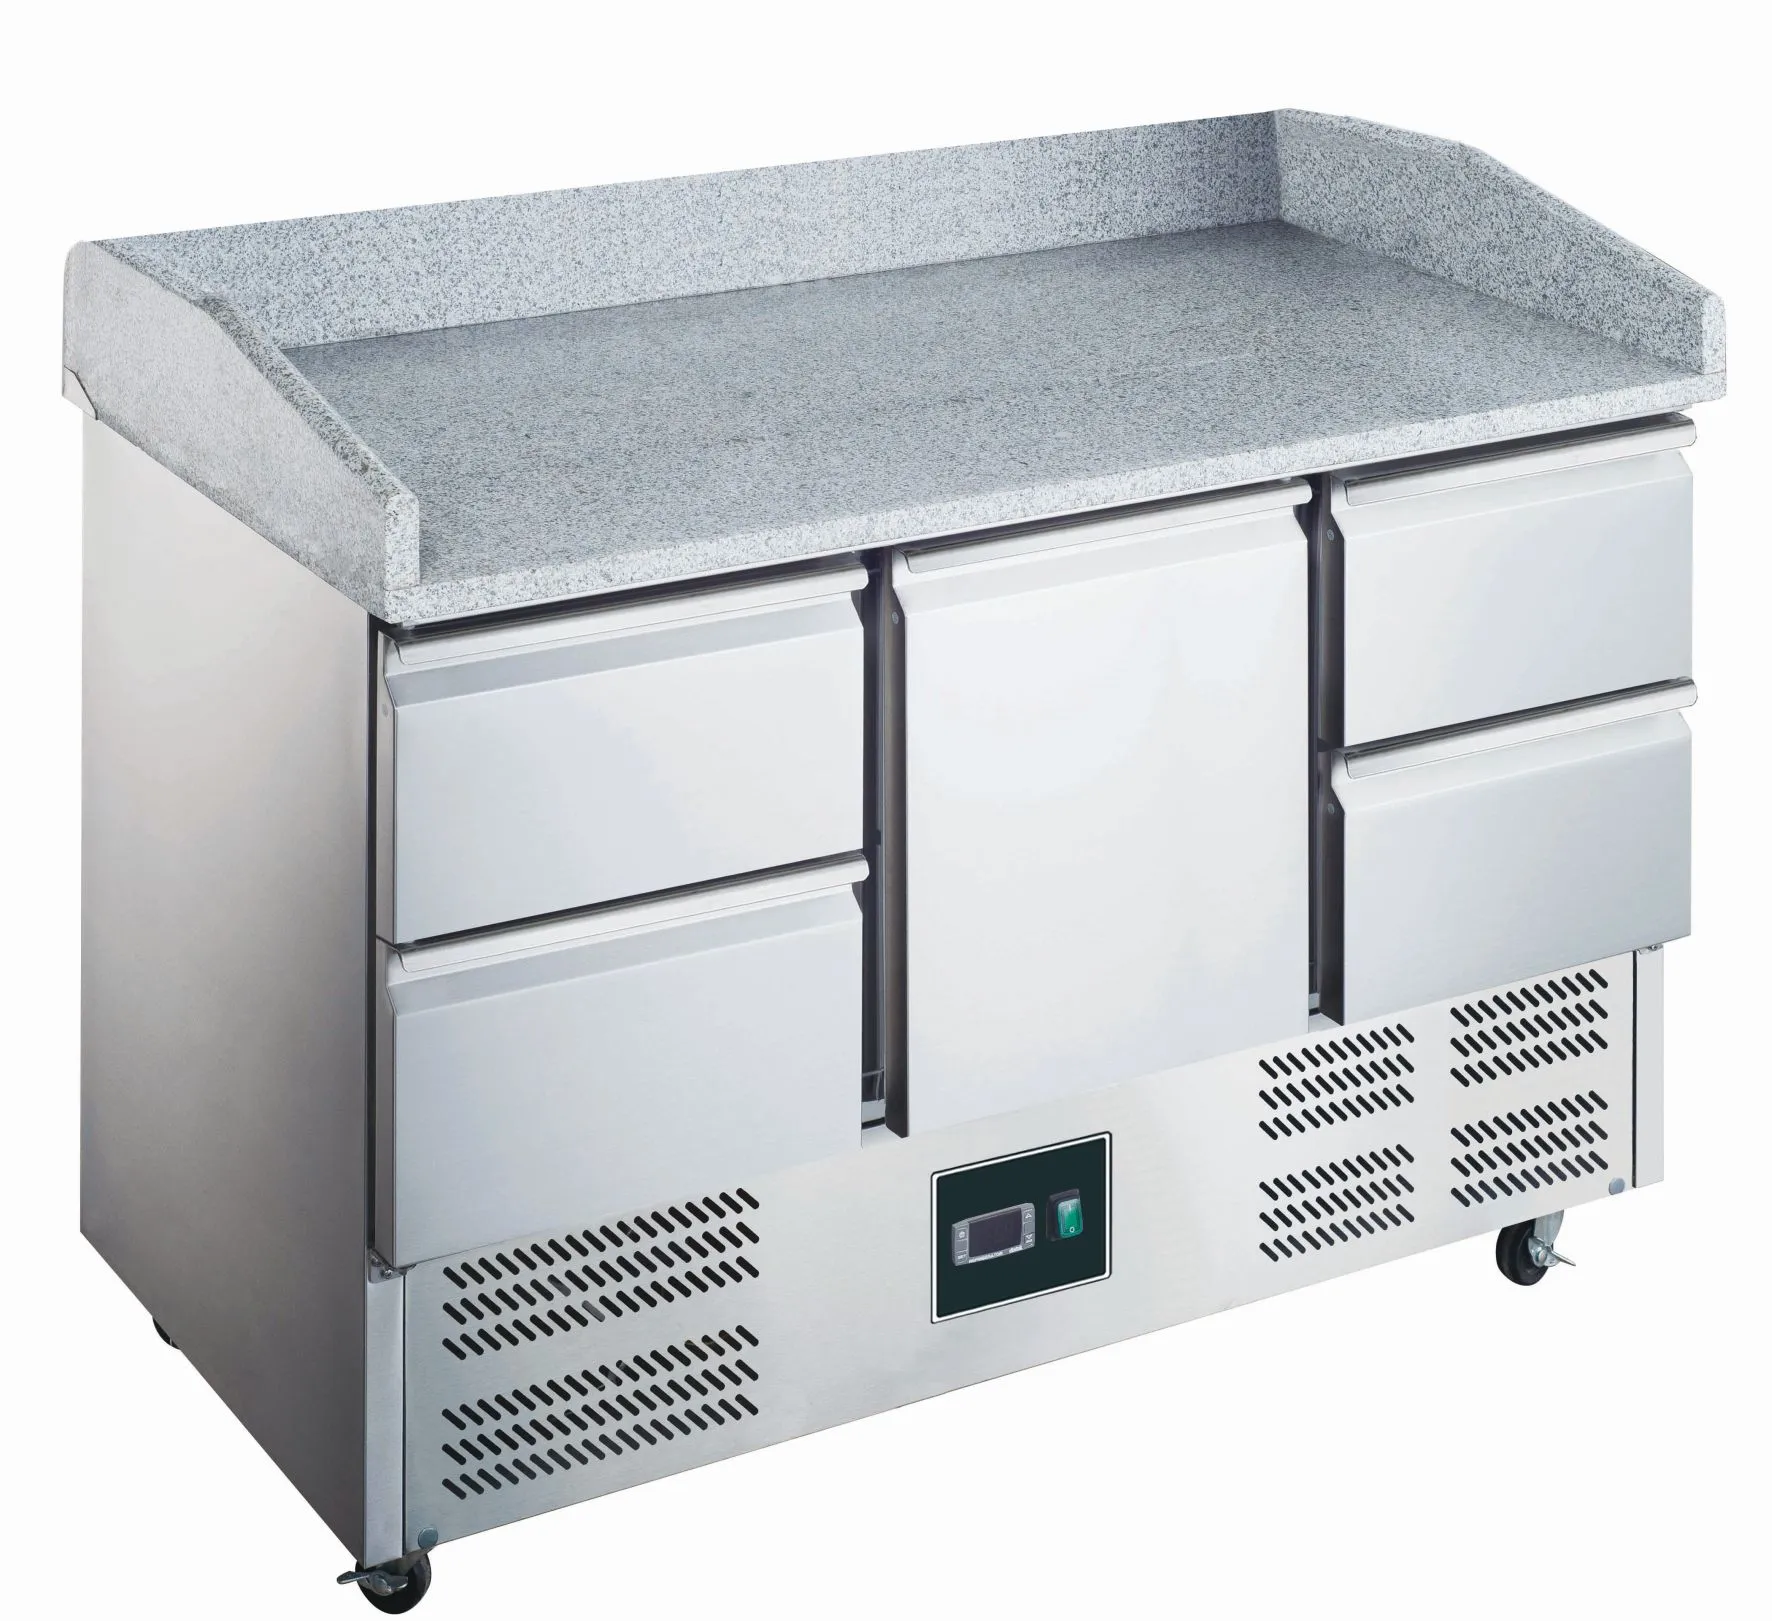 Saro Pizza preparation table with glass top Model ES 90 4 Drawer